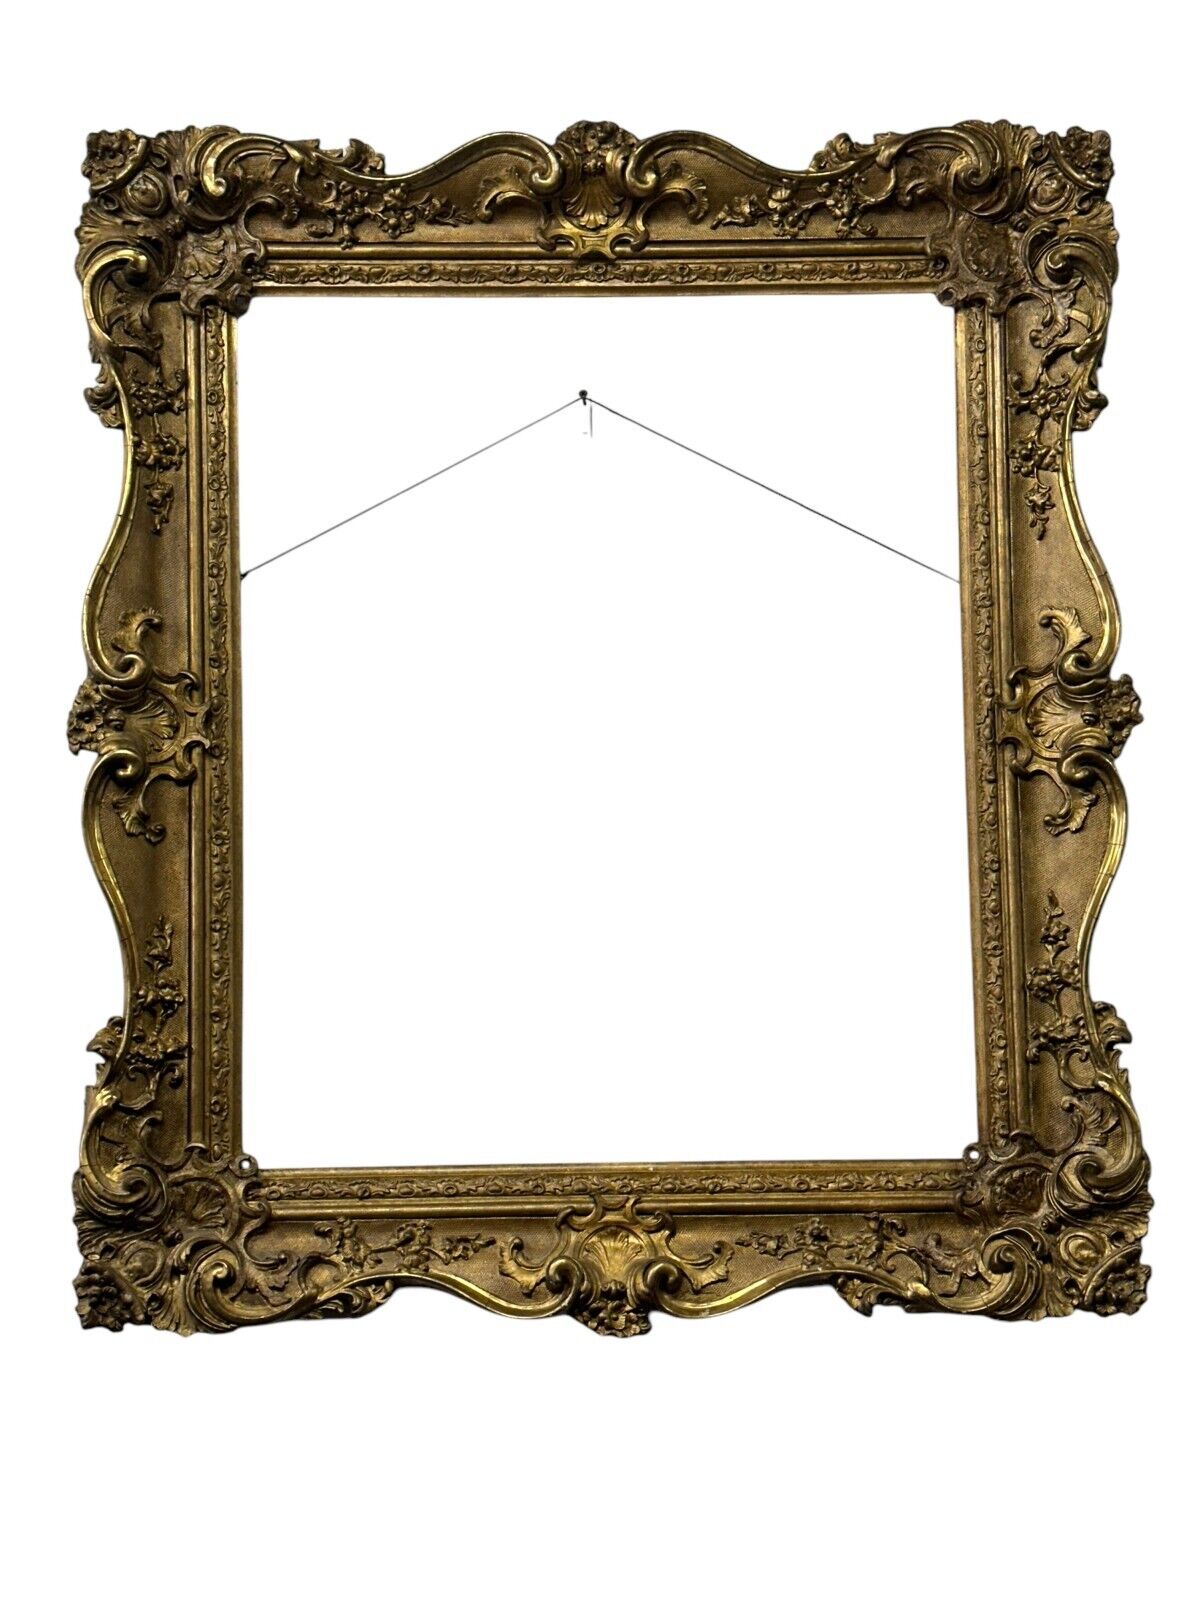 1870s large gilt french victorian ornate carved frame for painting mirror 34x40